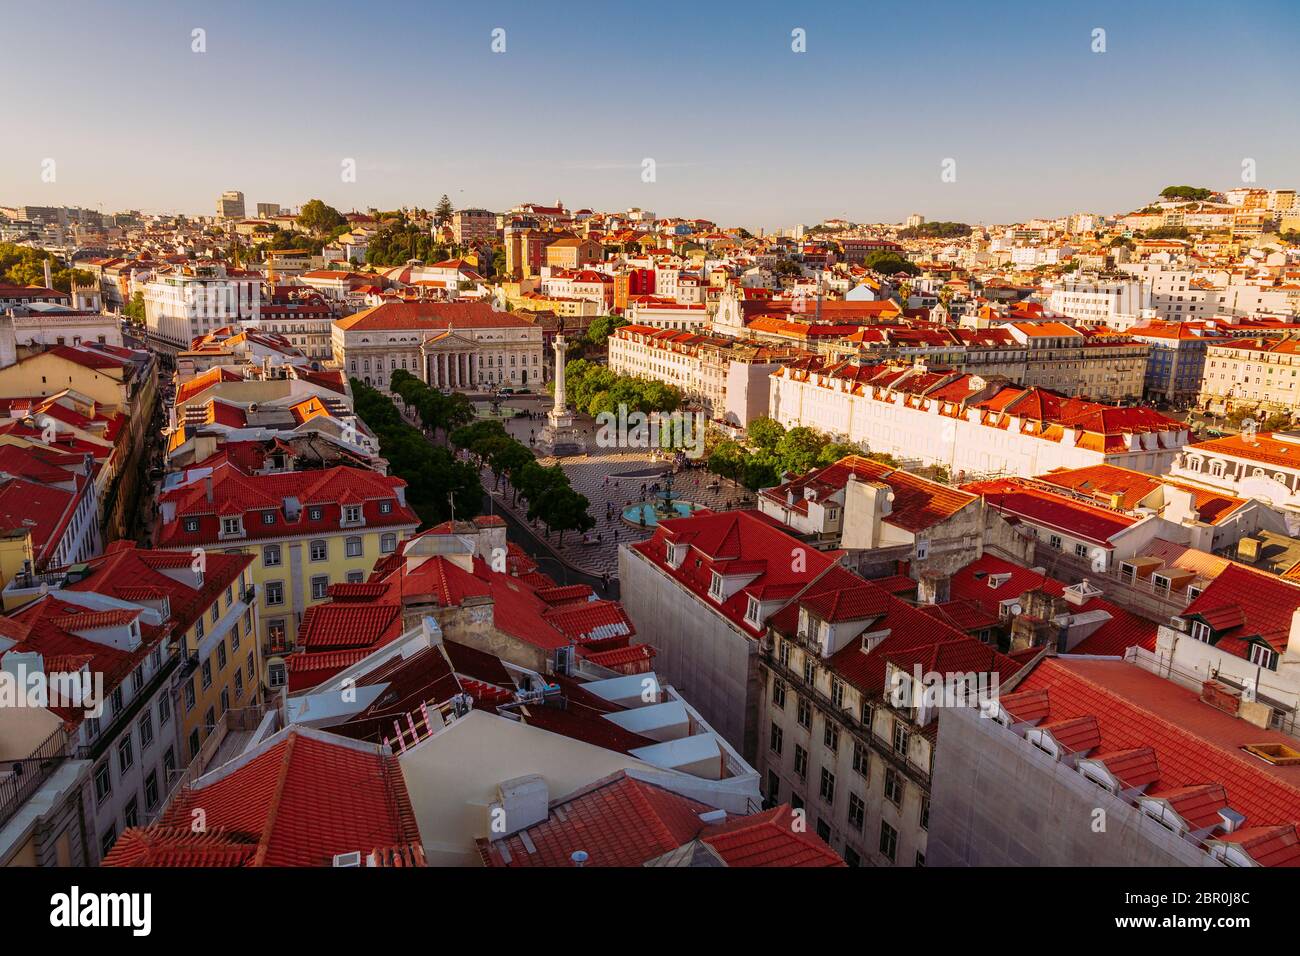 King Pedro IV, Rossio Square seen from Santa Justa Lift in Lisbon, Portugal Stock Photo